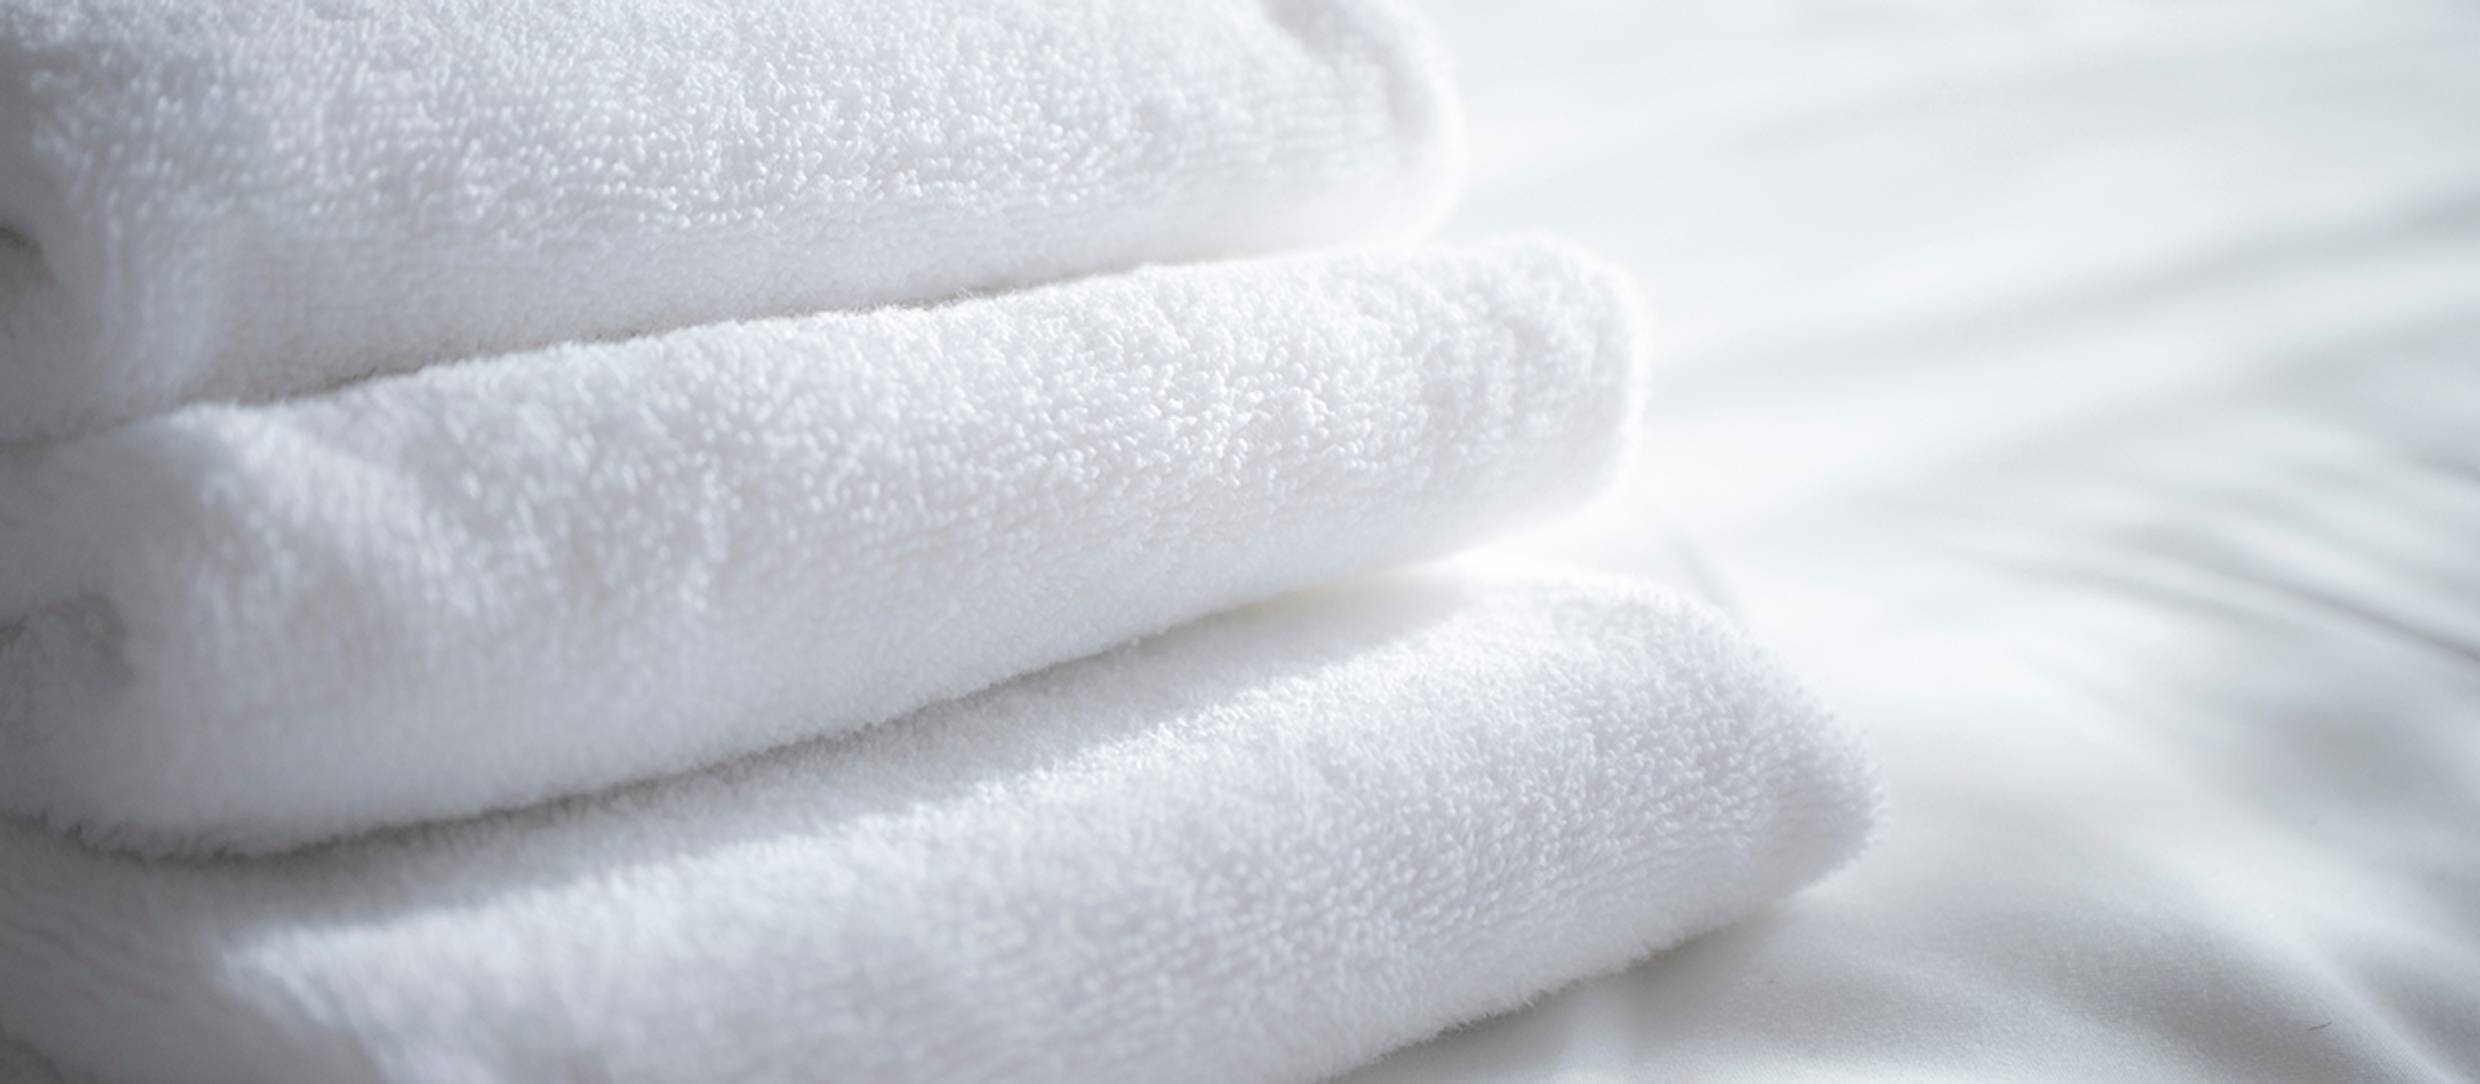 Stack of freshly laundered white spa towels